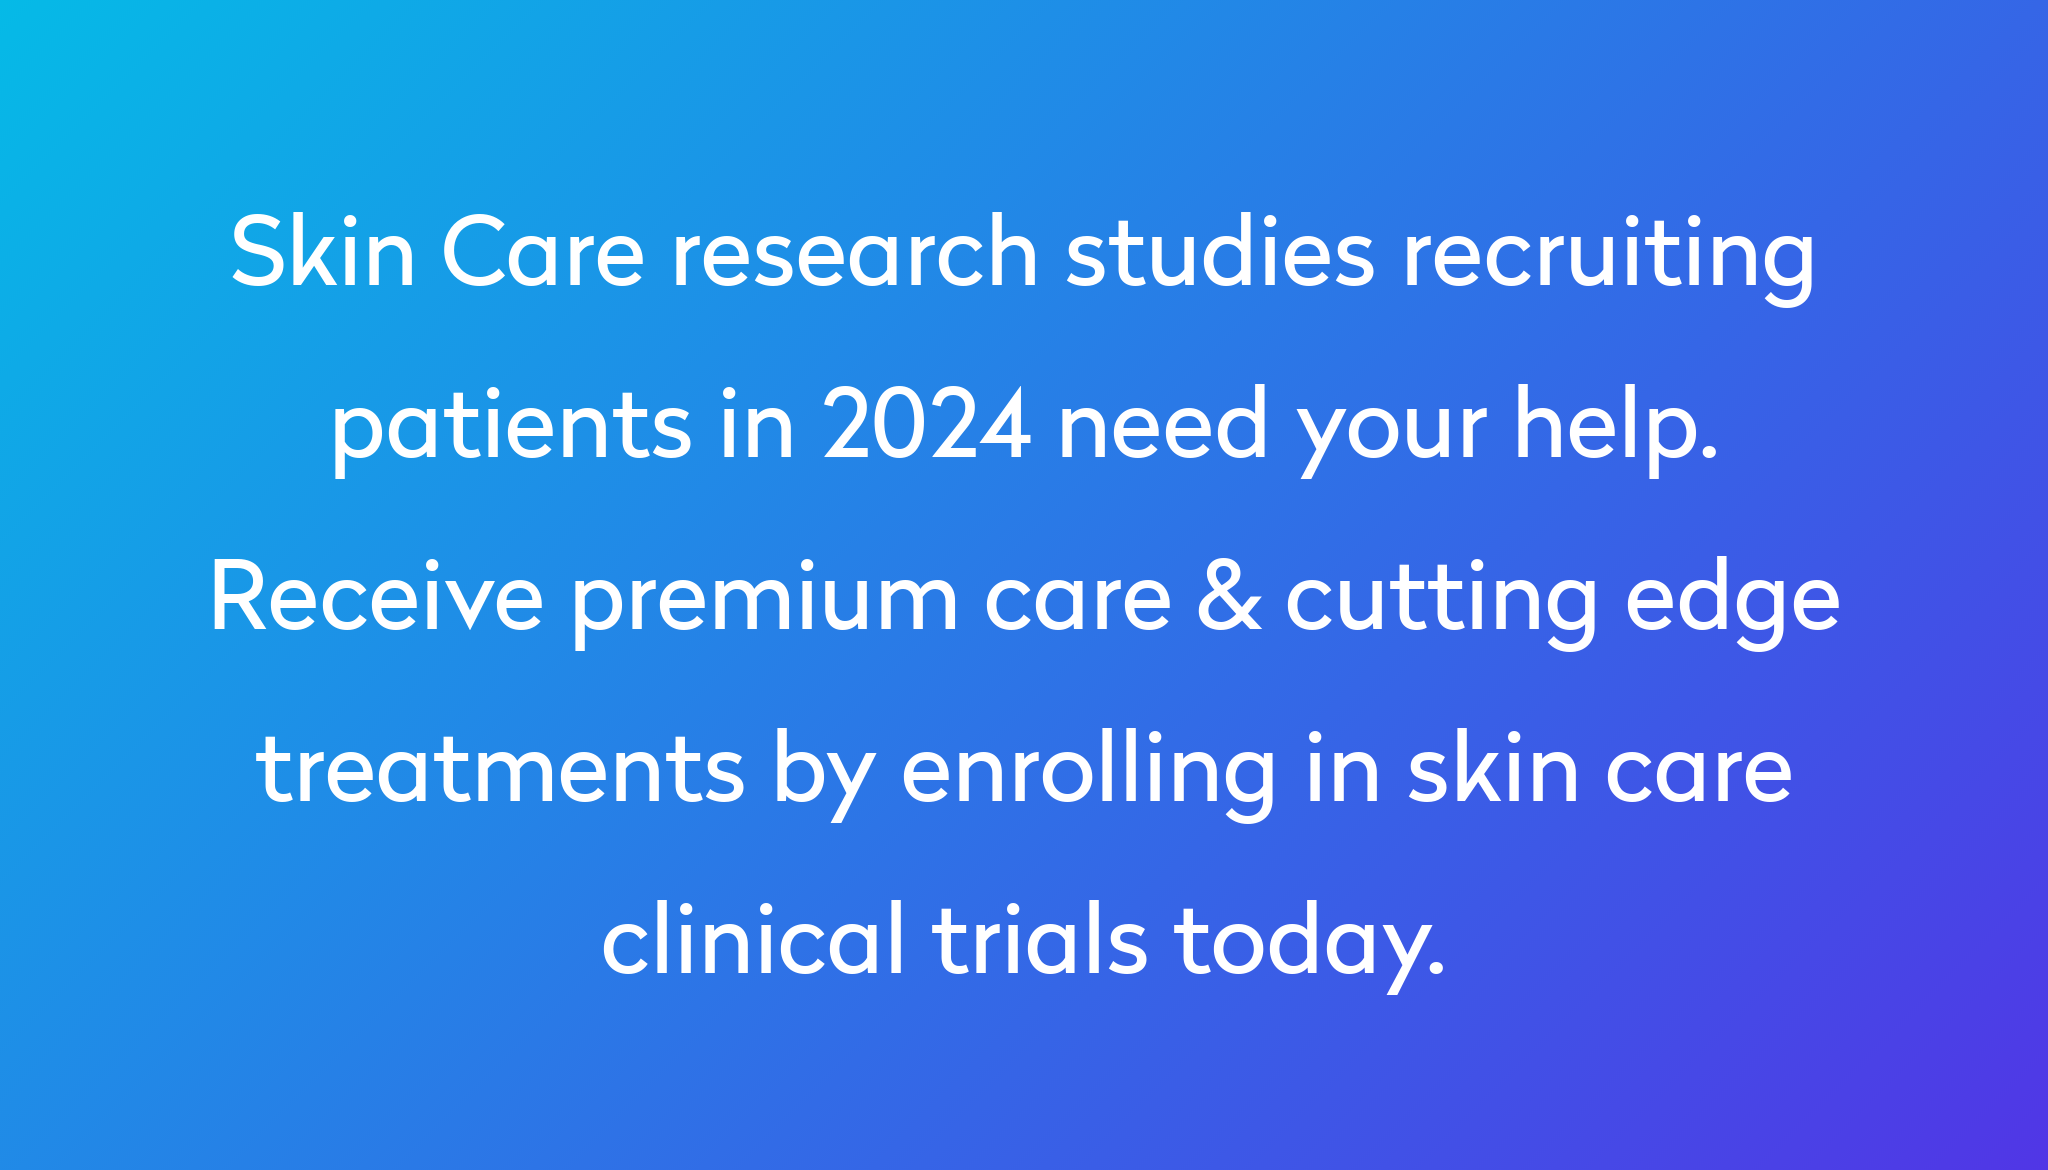 Skin Care Research Studies Recruiting Patients In 2024 Need Your Help. Receive Premium Care & Cutting Edge Treatments By Enrolling In Skin Care Clinical Trials Today. ?md=1